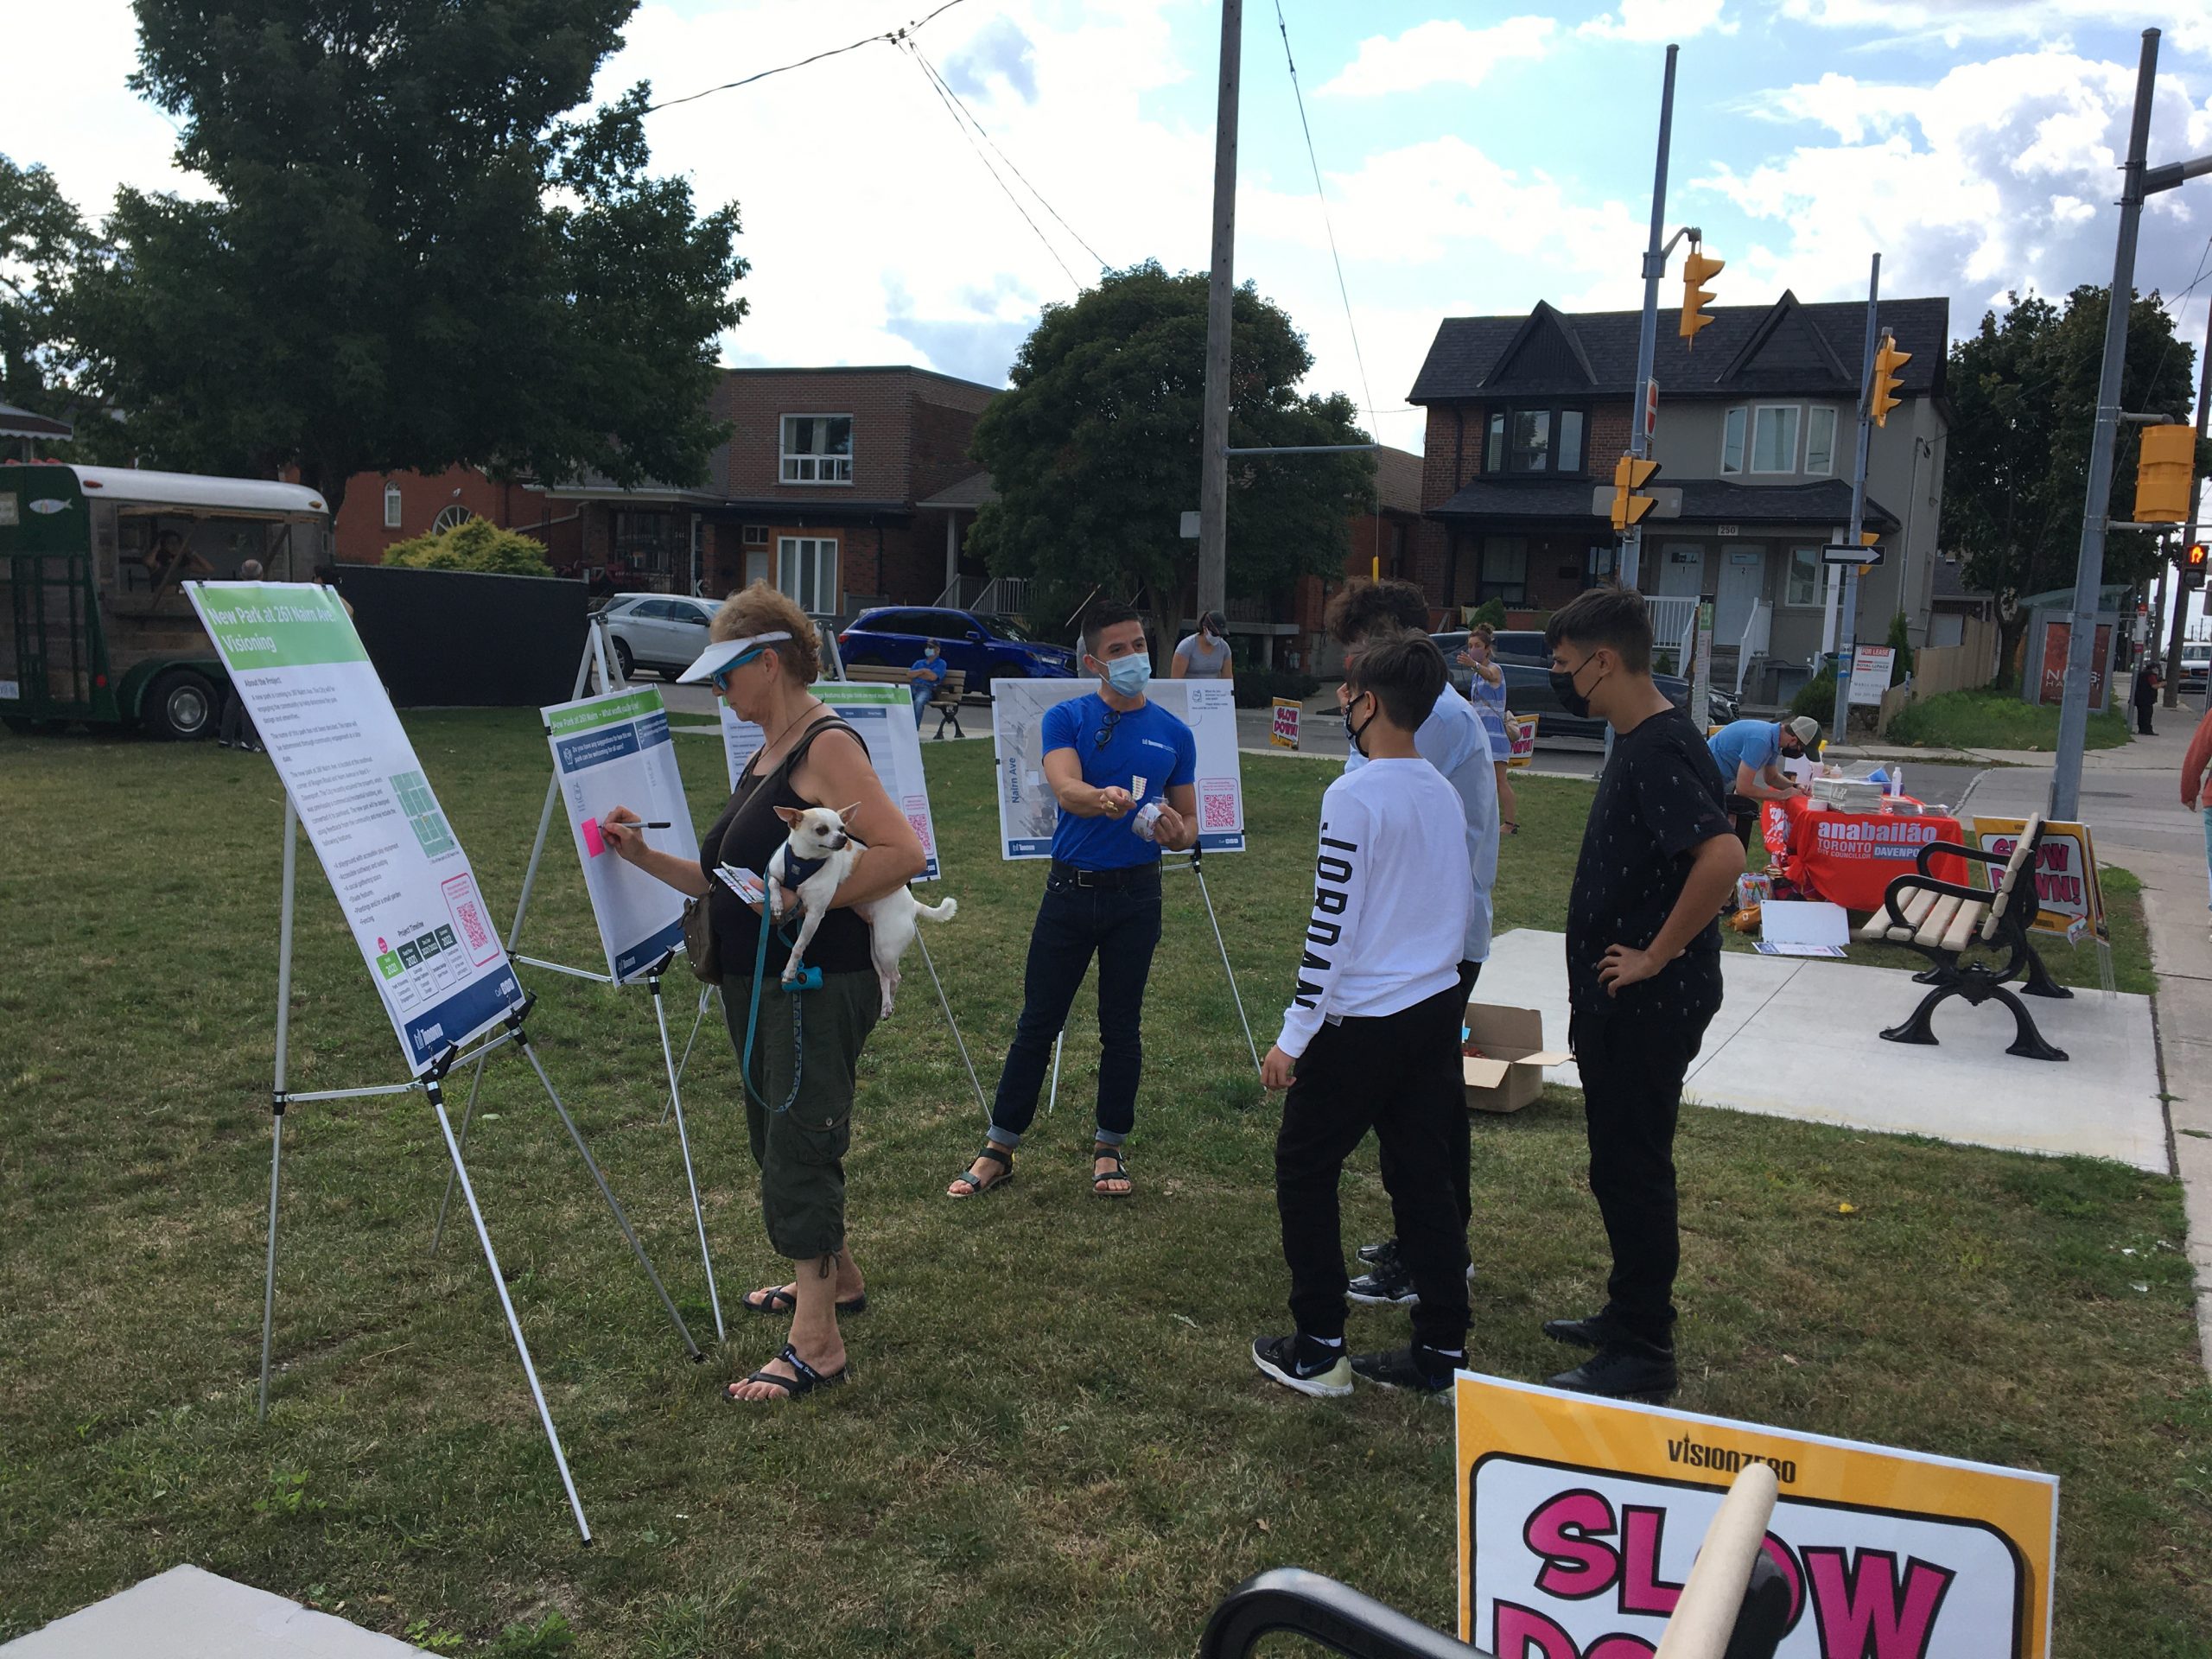 Pop-up participants stand infront of information boards at 261 Nairn Avenue.